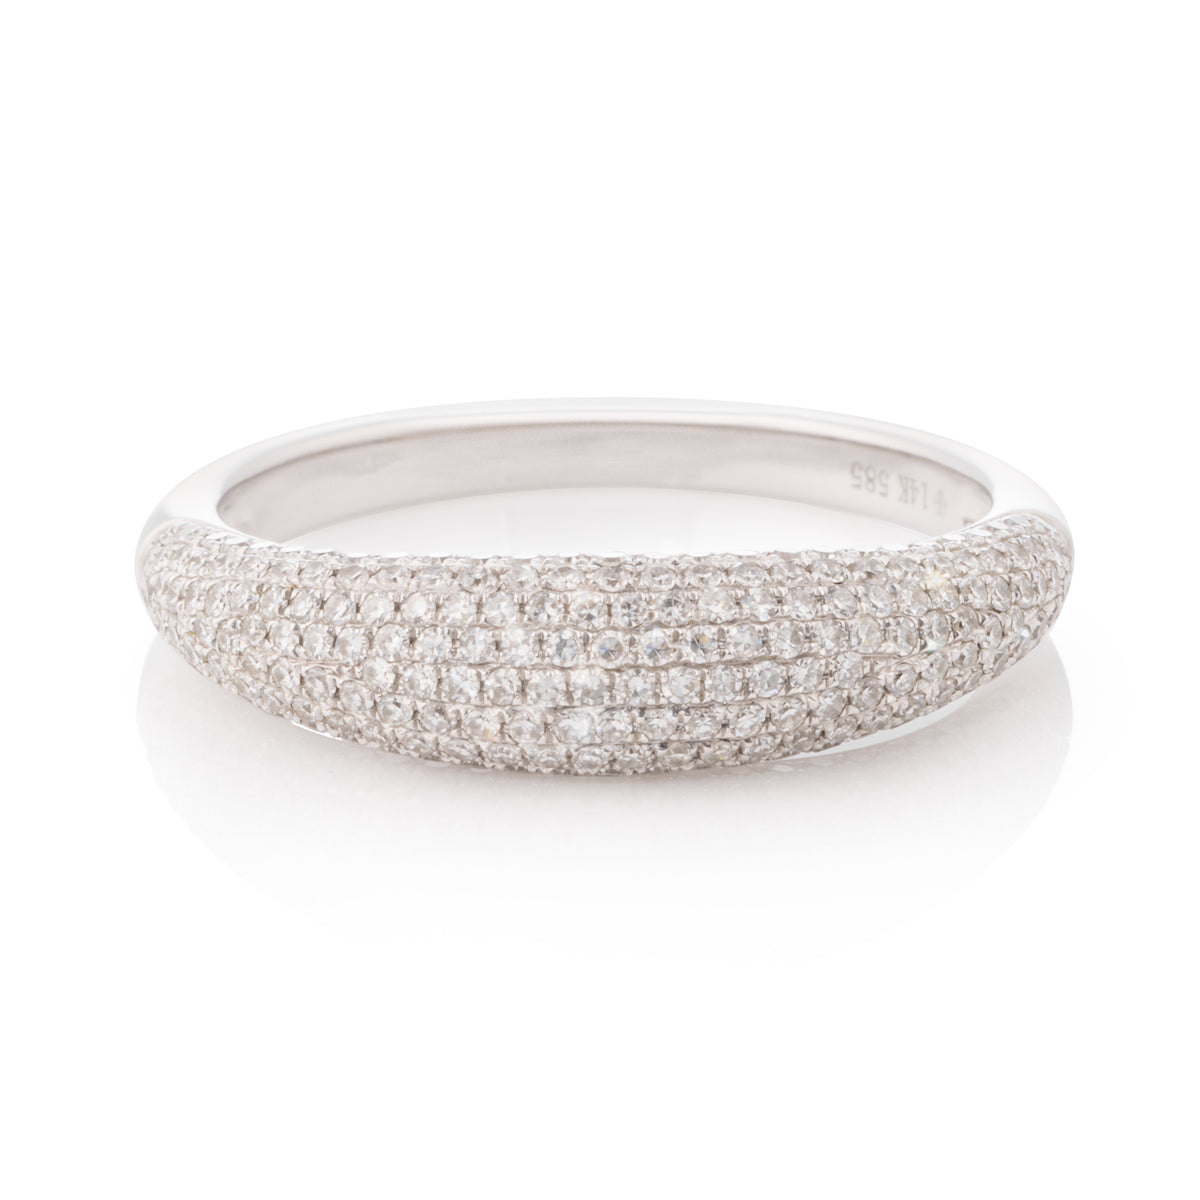 New Petite Pave Dome Ring